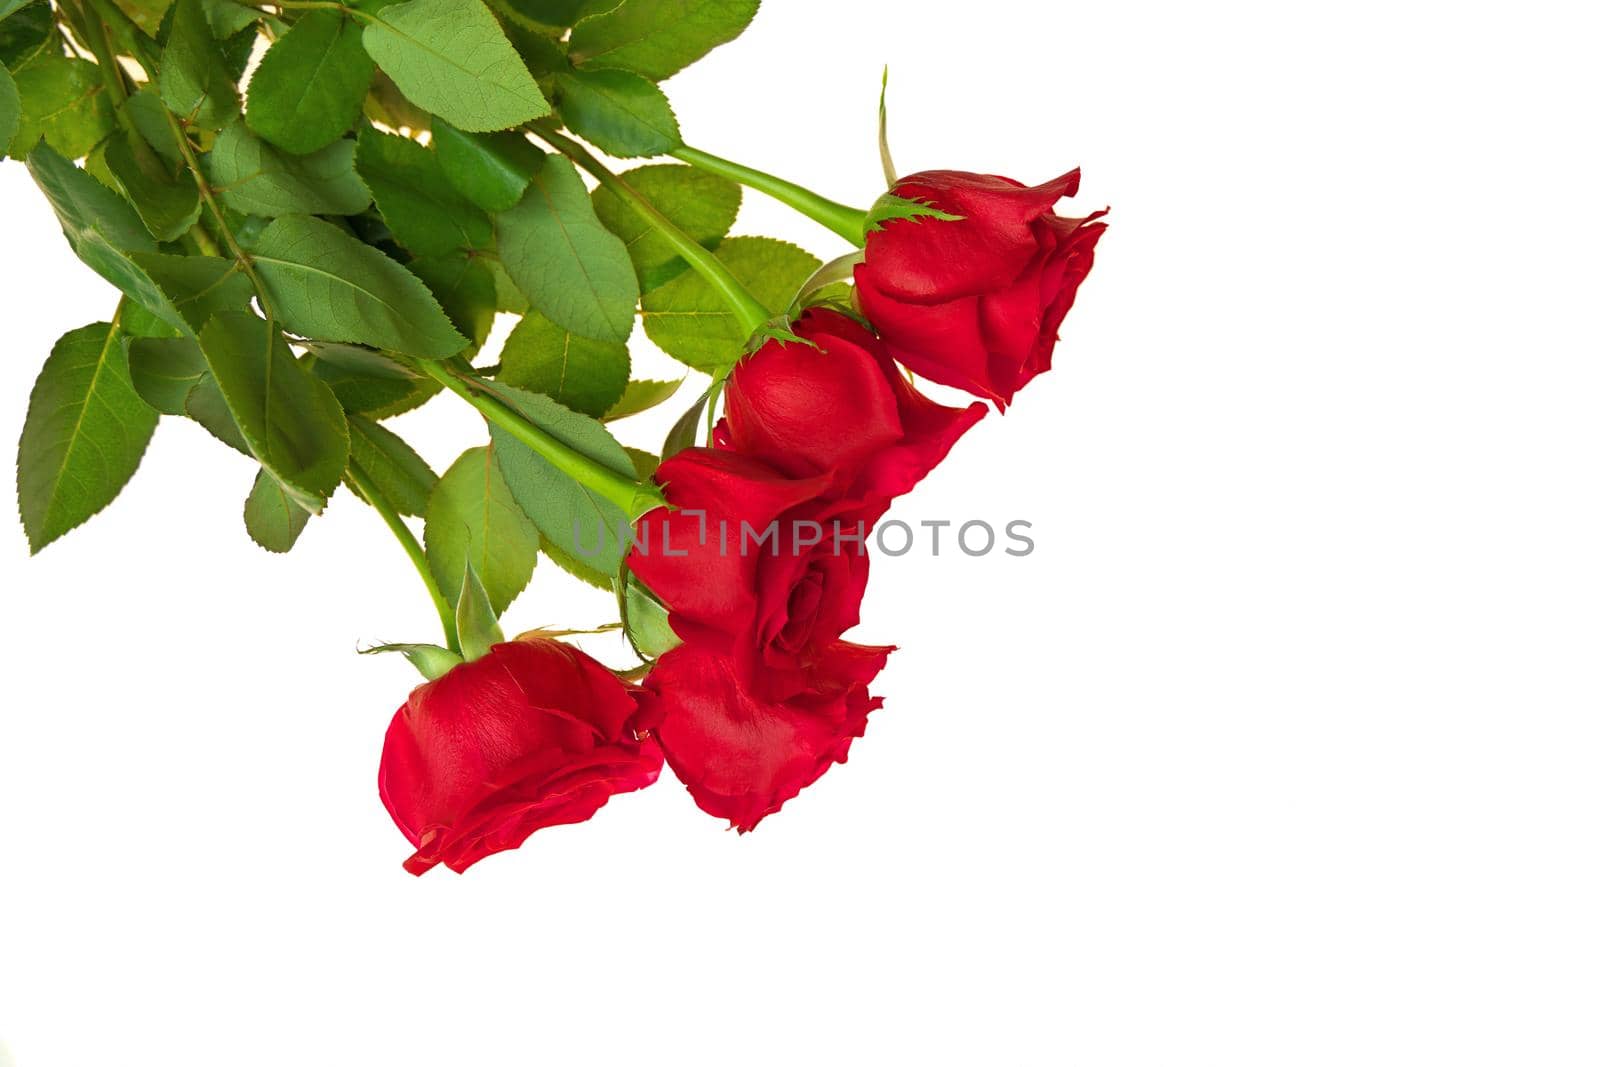 Directly Above Overhead View of Red Rose Bouquet Isolated on a White Background. Copy space right. by markvandam